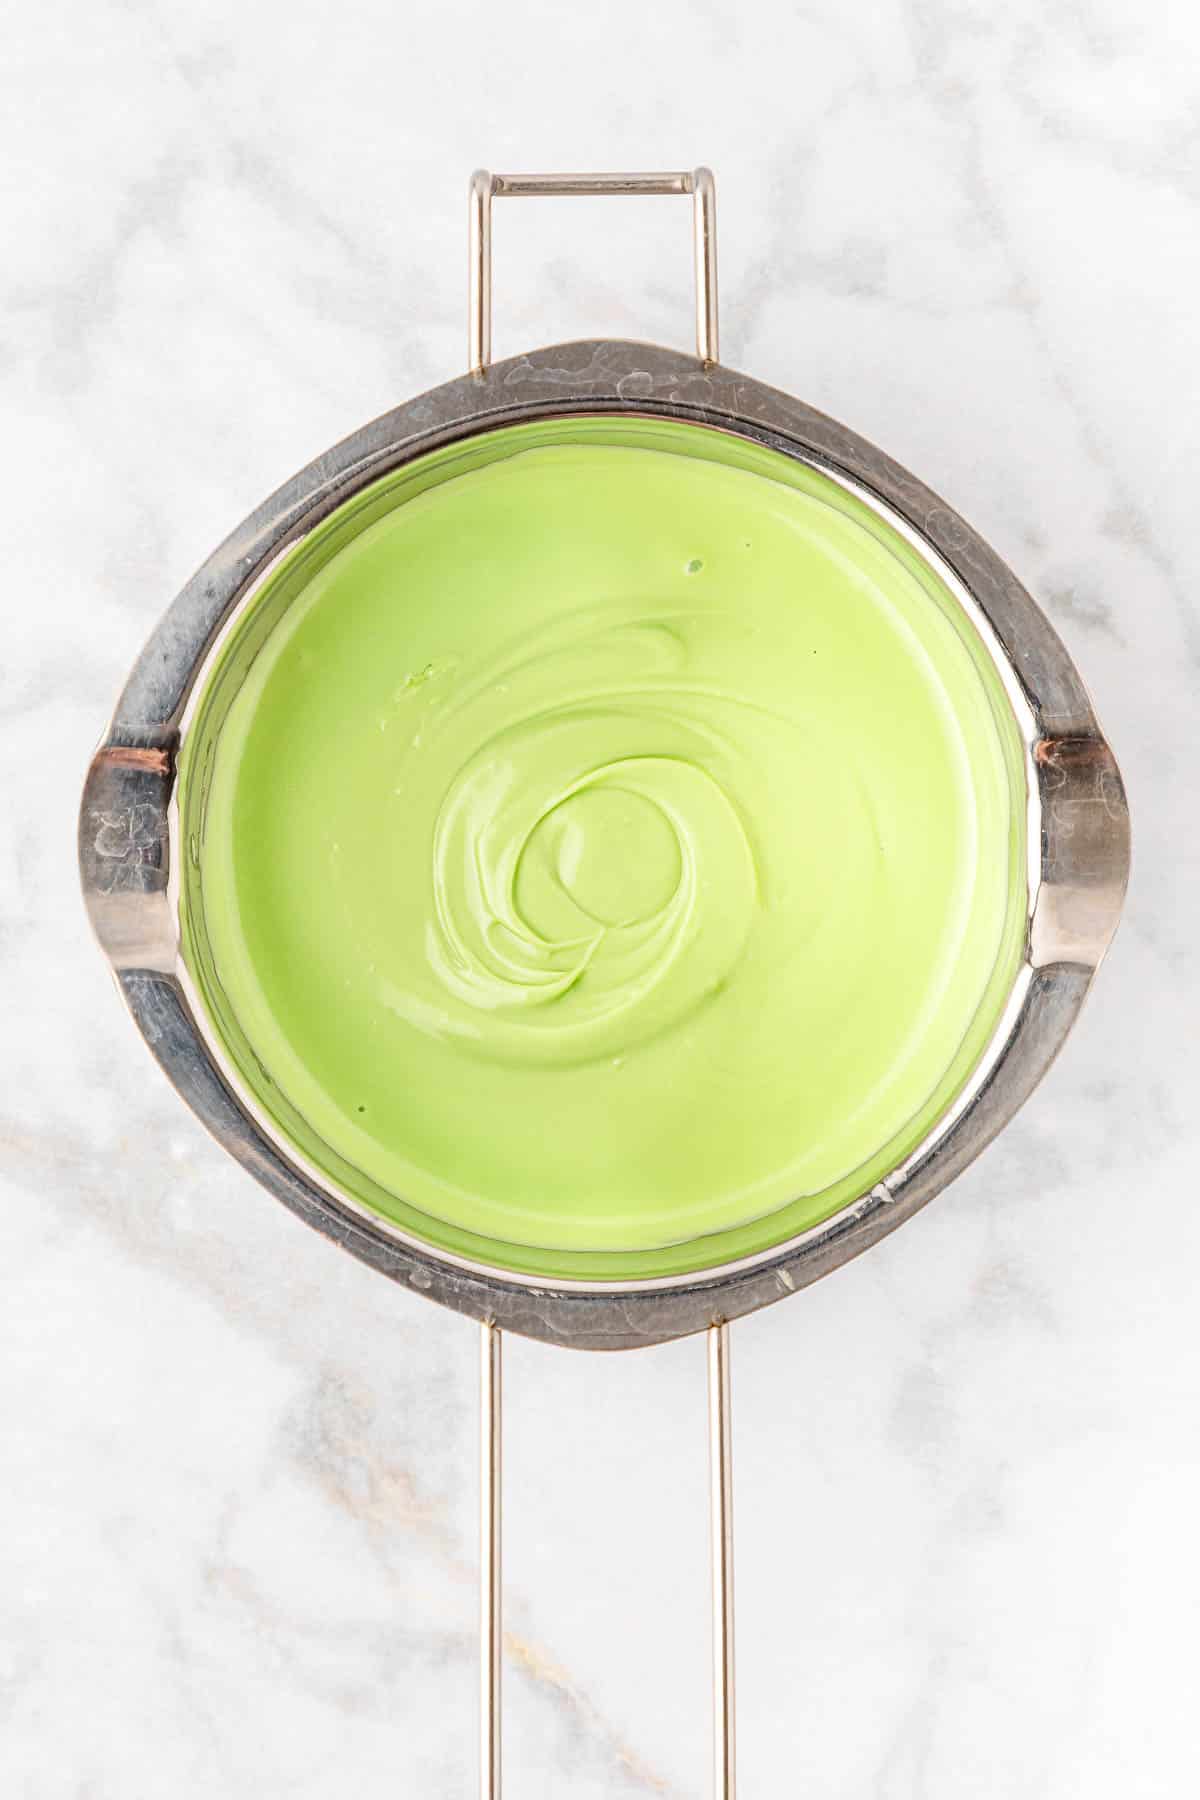 A stainless steel pot of green icing sitting on top of a marble table.